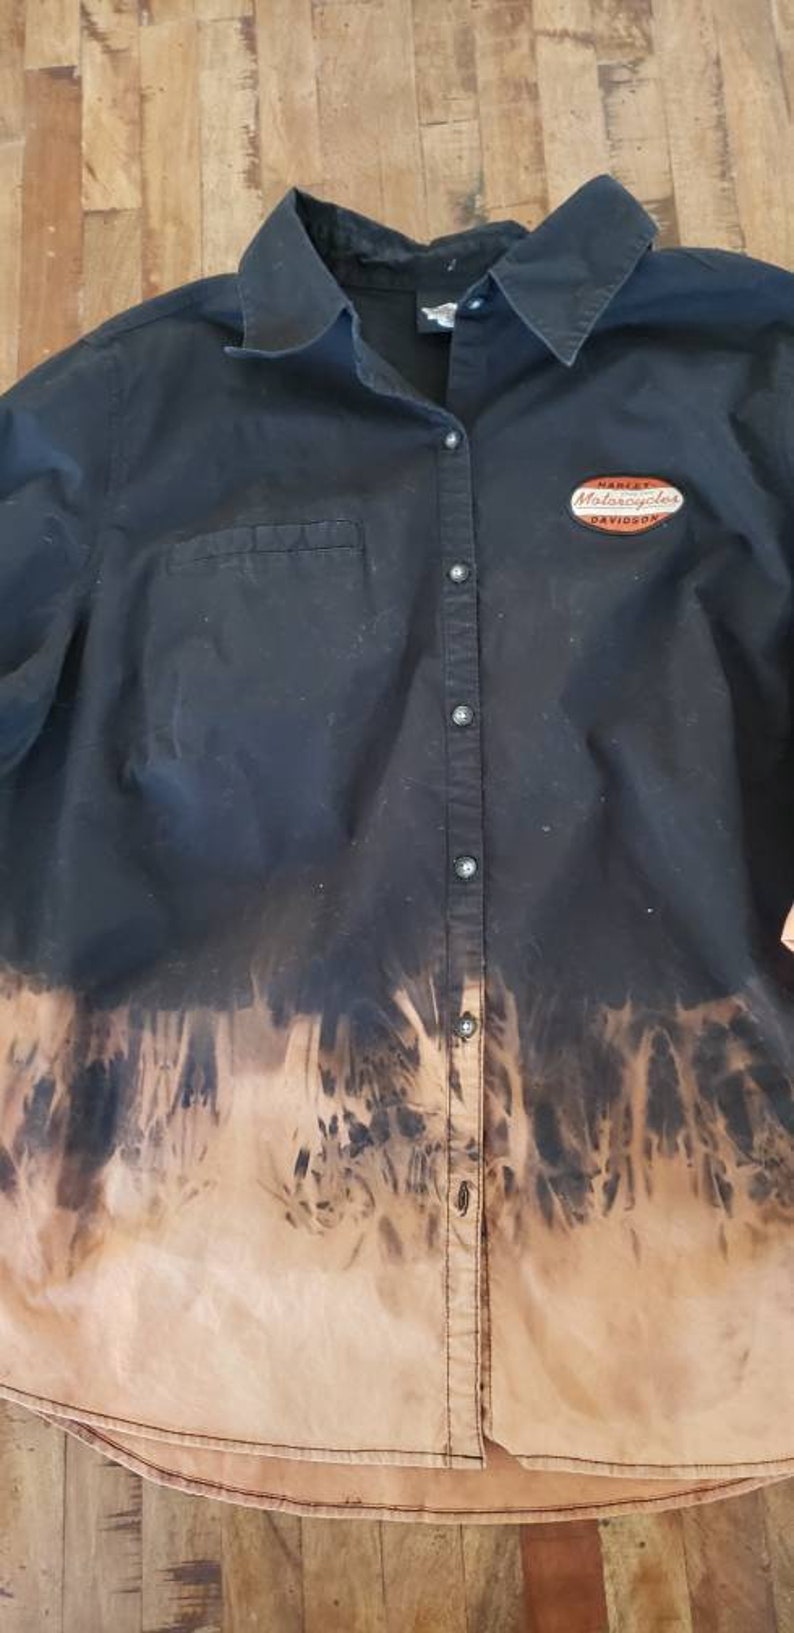 Distressed by hand done process to upcycle this one of a kind original. Womens size 1X Harley Davidson shirt